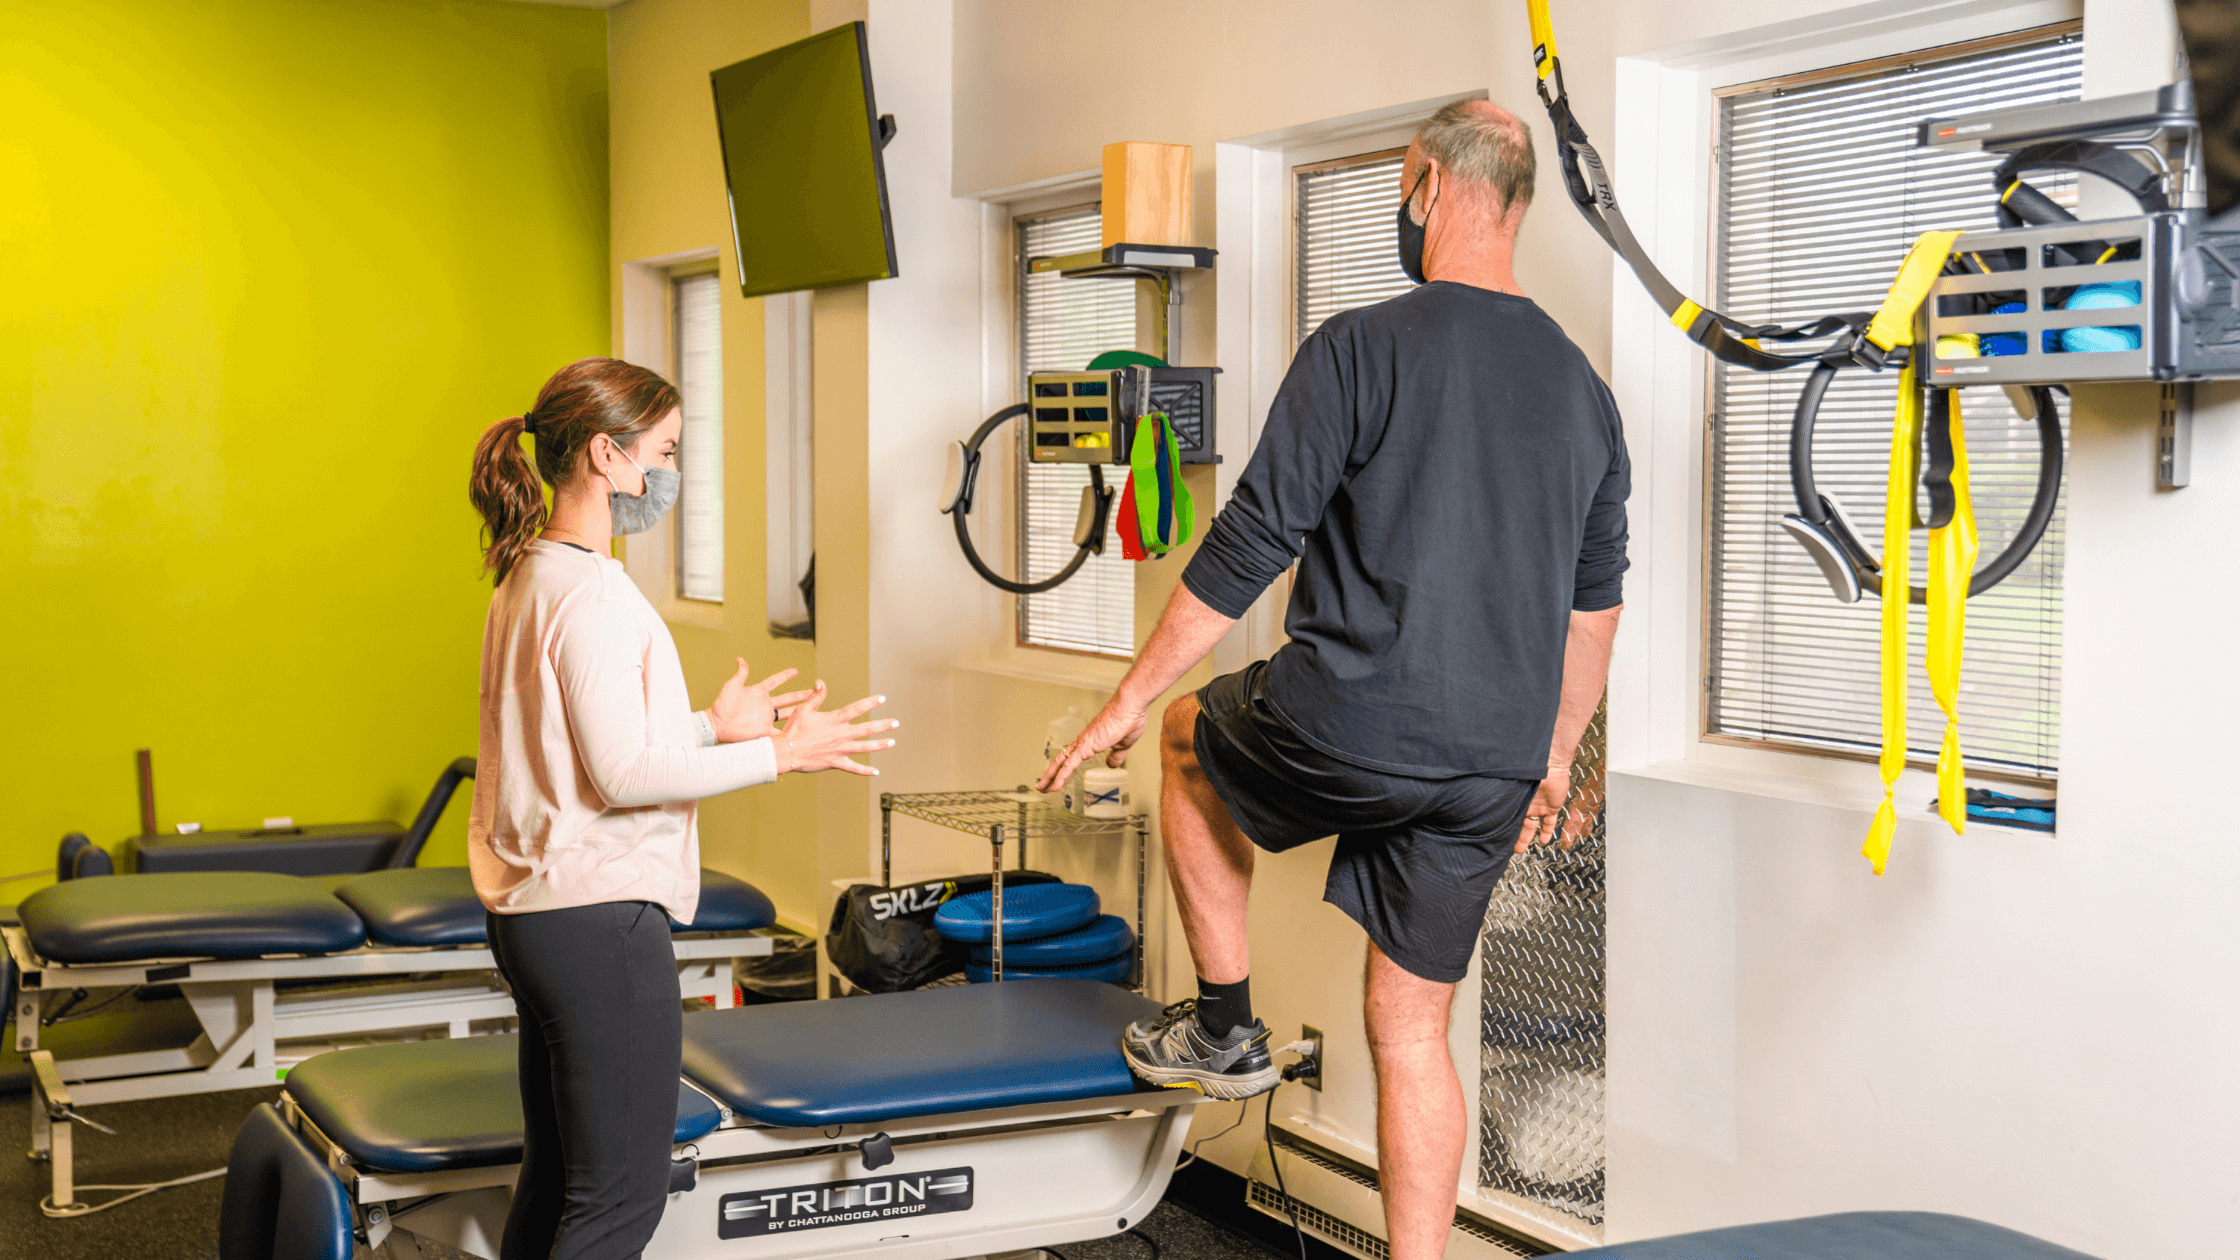 Is My Physical Therapy Working? How To See Progress